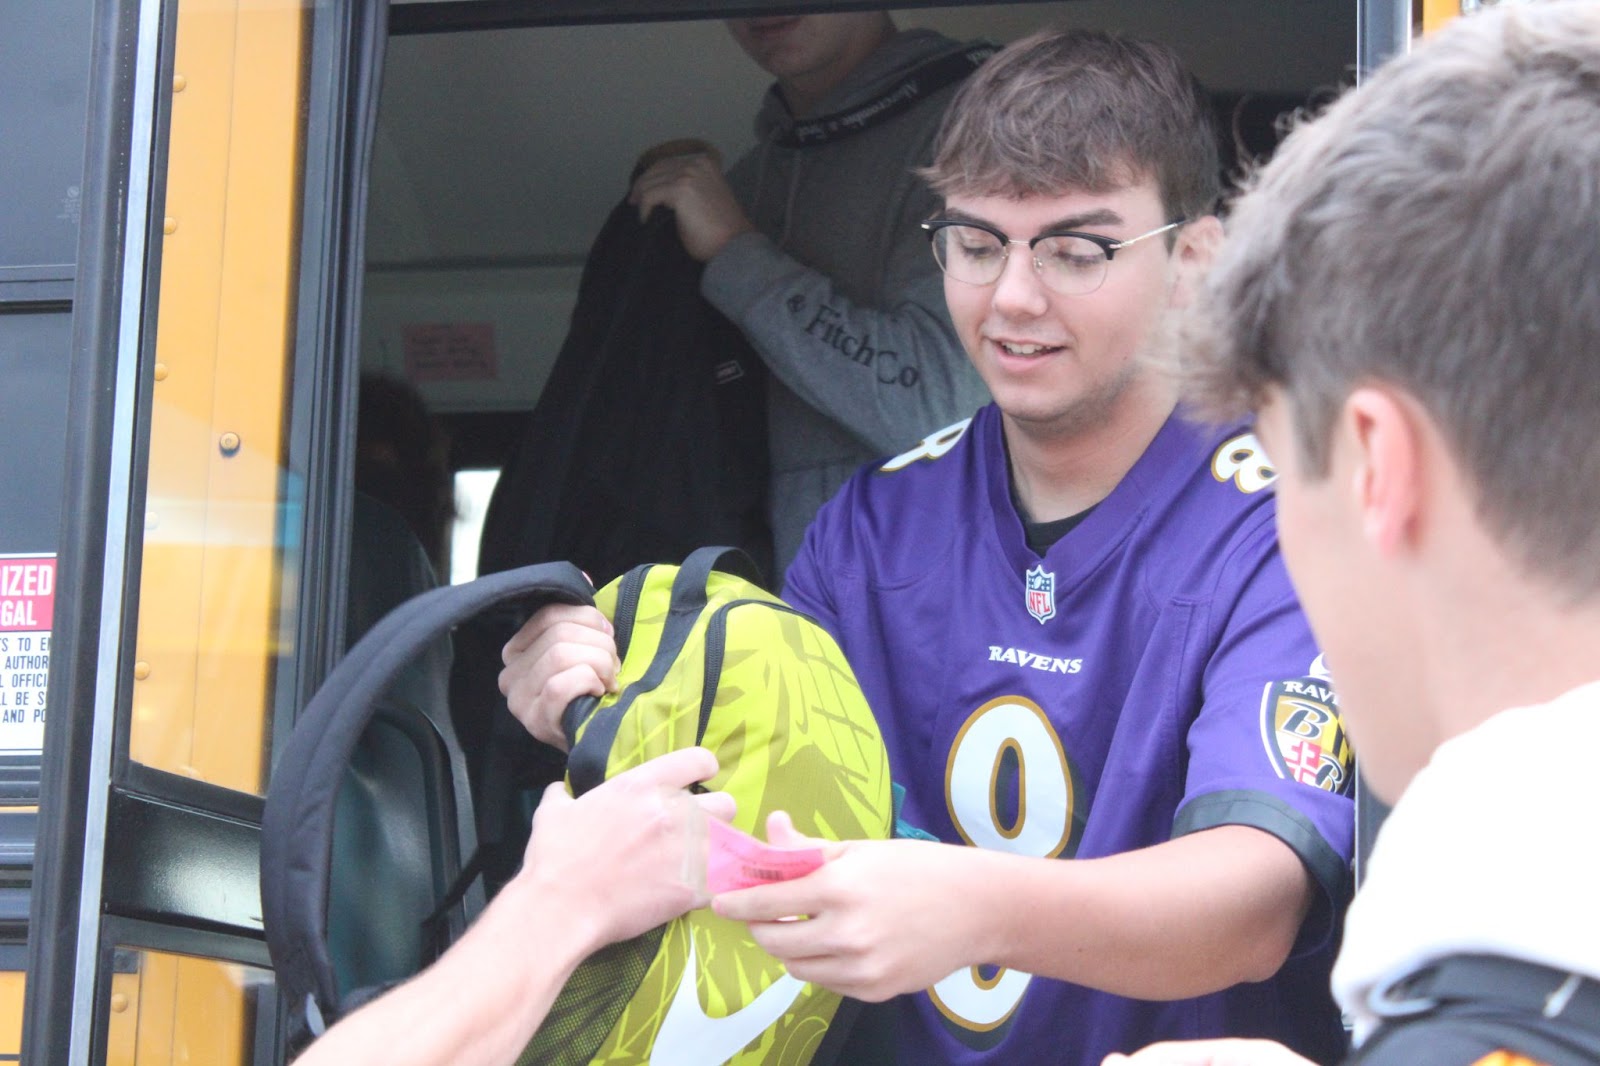 Seth Deloe, a senior CRANA member, helps unload bookbags from buses (Photo by Rylee Coe/Student contributor) 